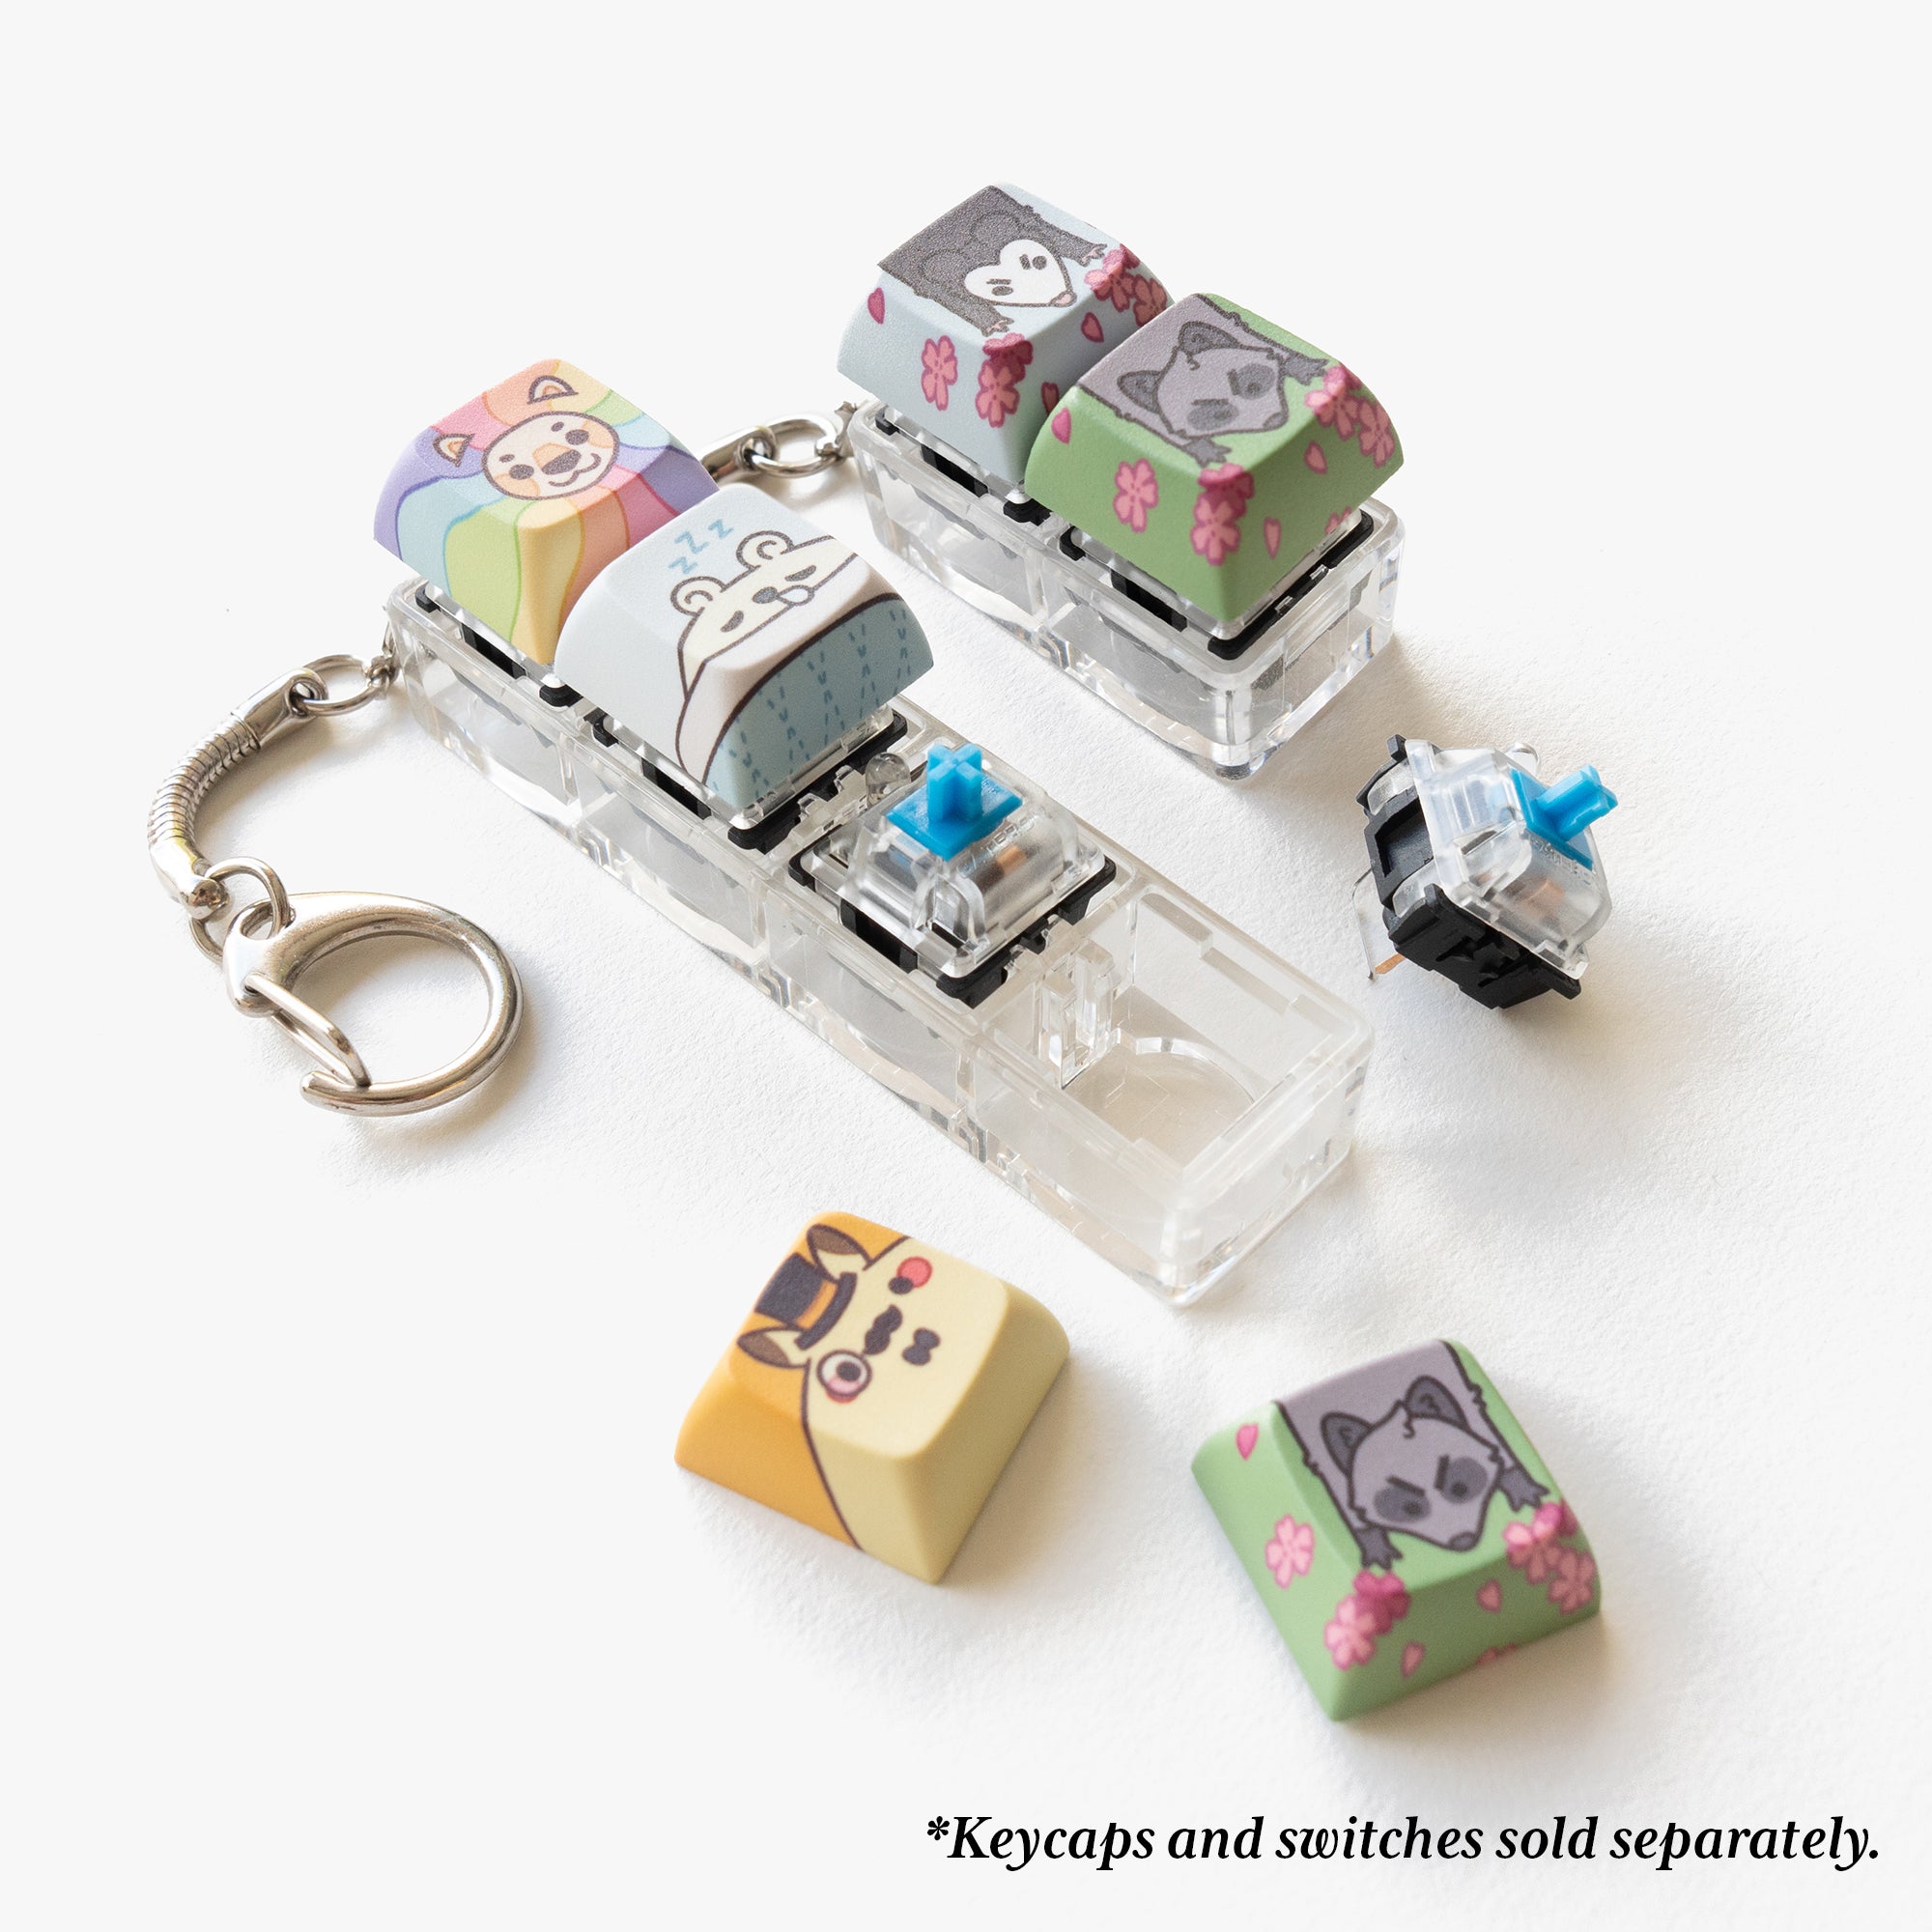 Clicky Keychain Housings (No Keycaps/ Switches)